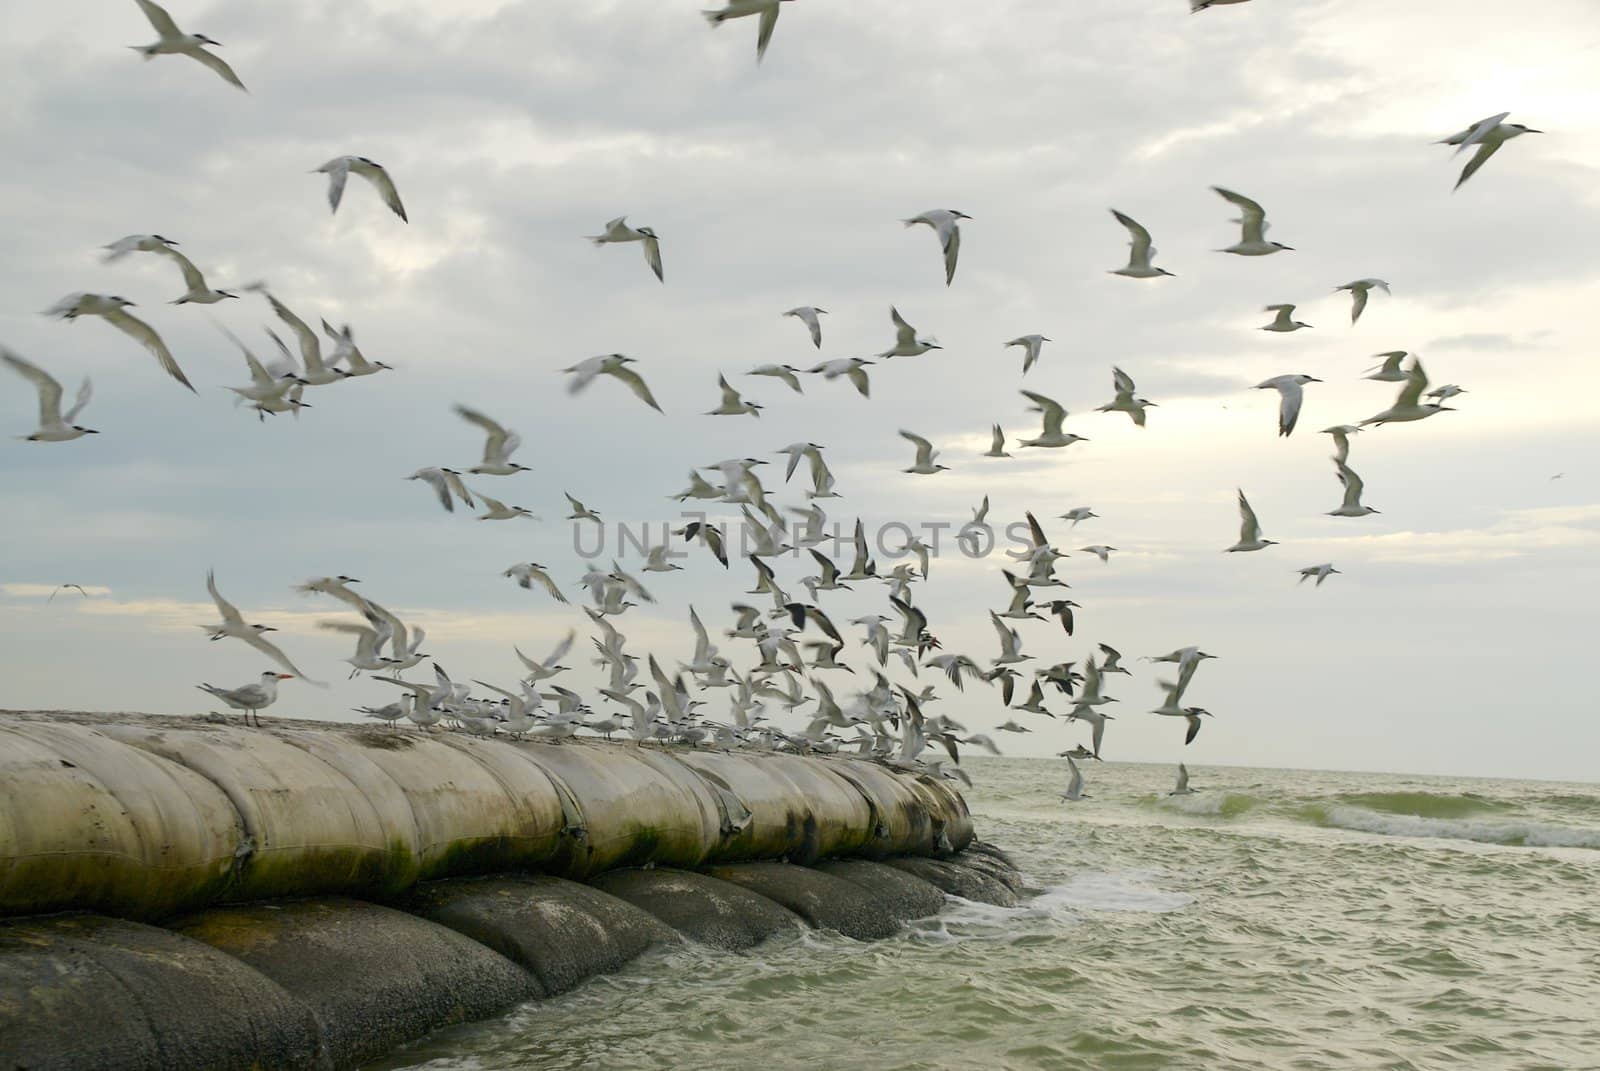 A flock of terns take flight from a man made outcropping at dusk